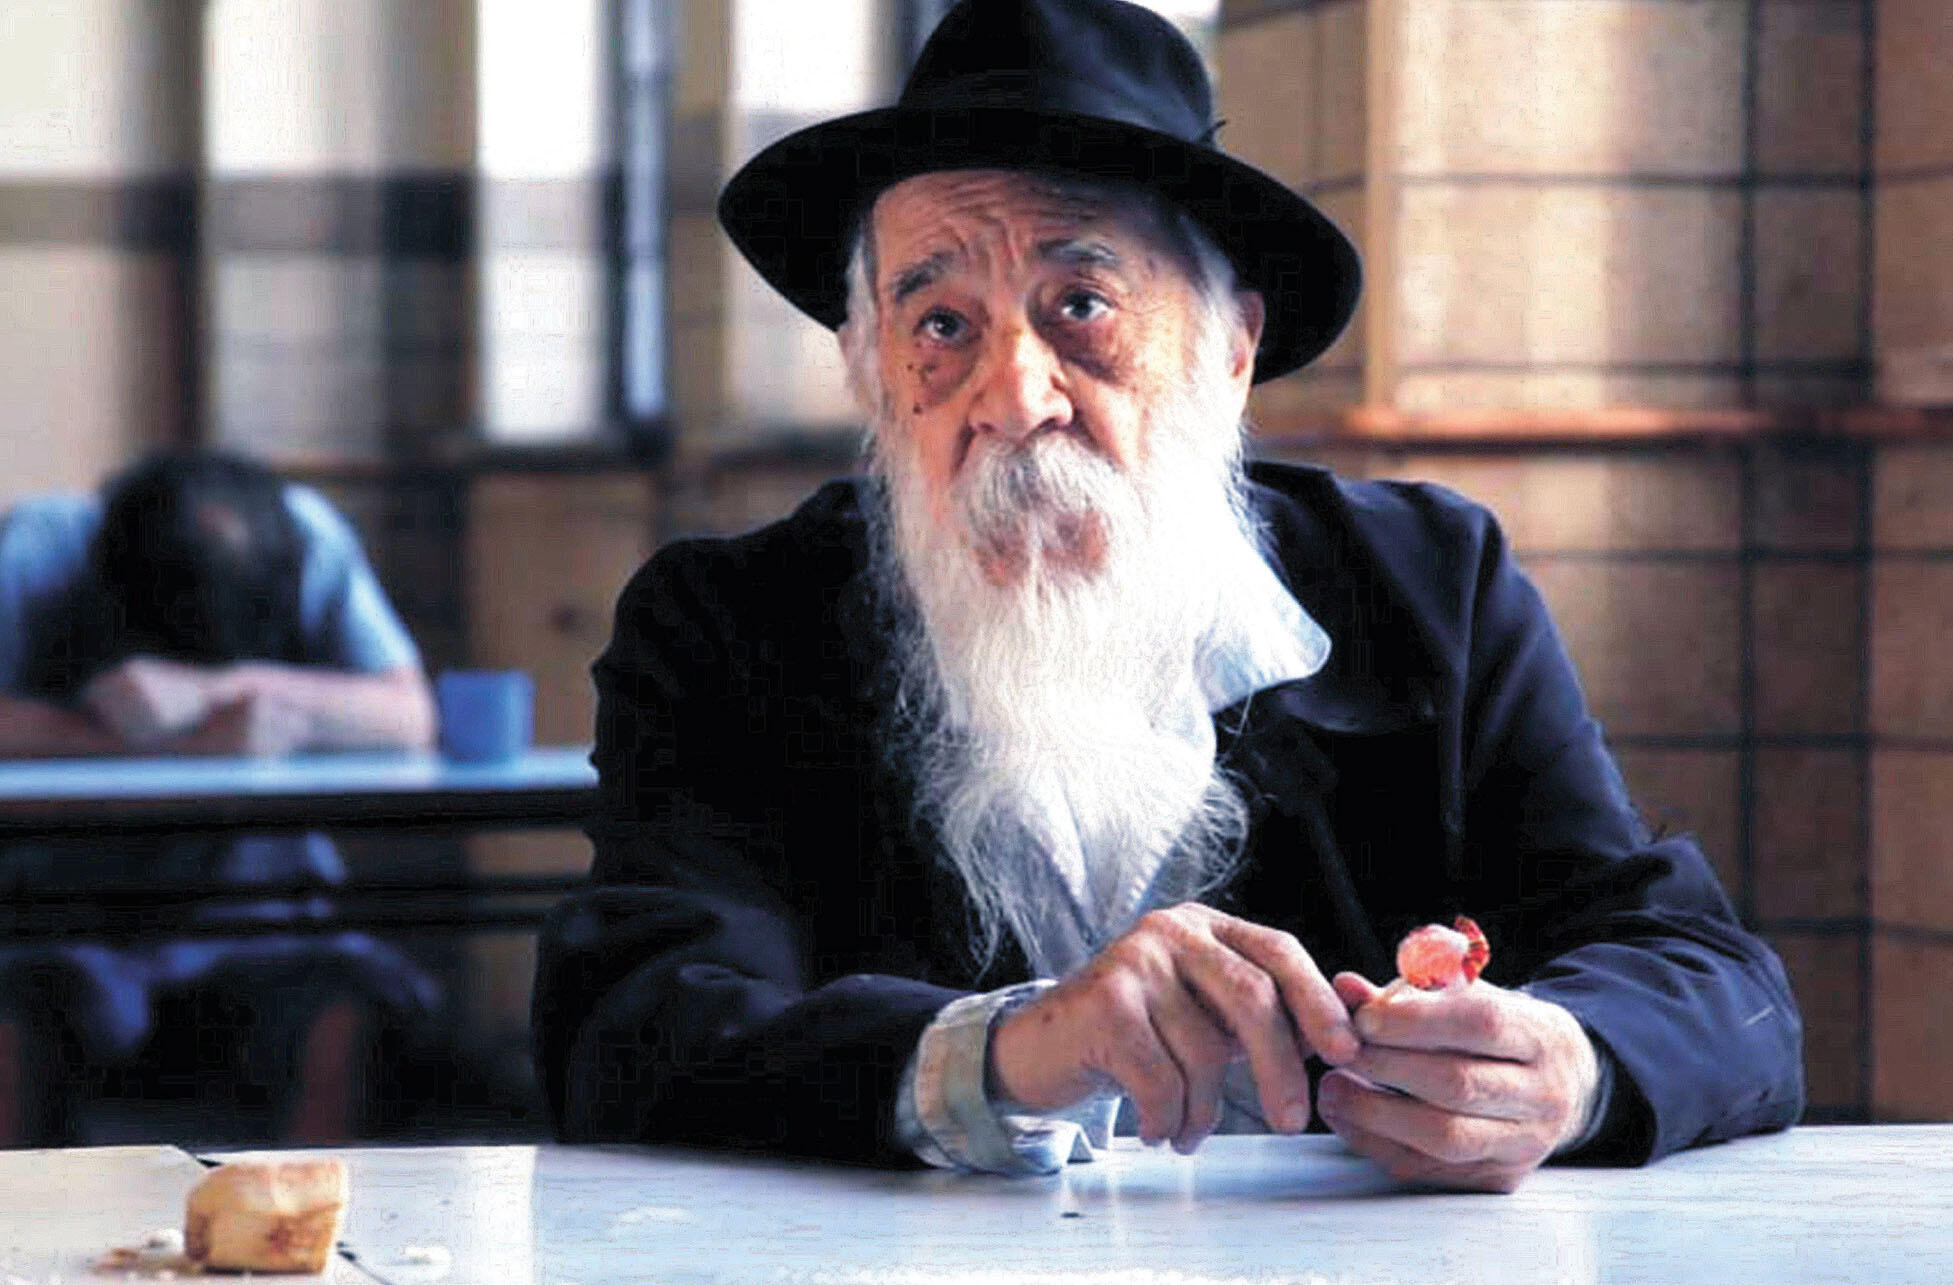 Fernando Birri as Remoro Barroso, sitting at a table in his trademark black hat and overcoat. (Photo courtesy of Orgon Films.)